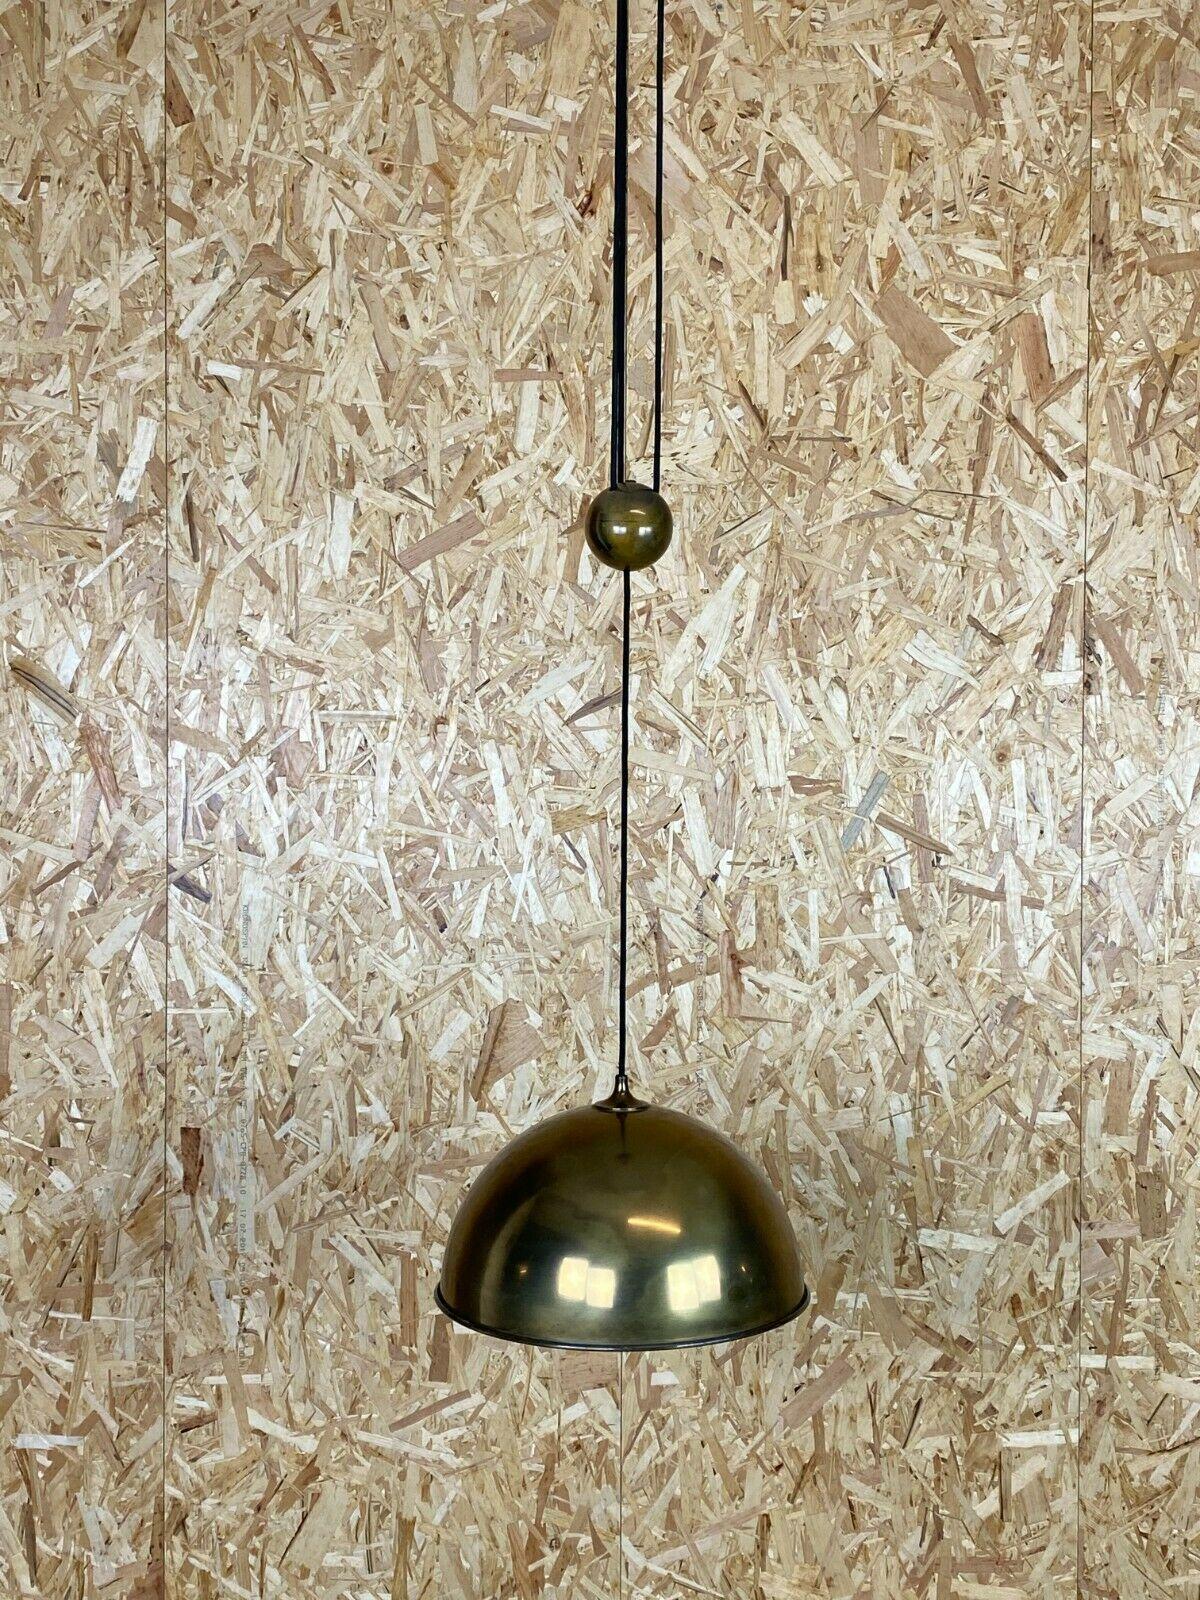 0s lamp ceiling lamp Florian Schulz Posa brass Brass Pendant Lamp 70s

Object: ceiling lamp

Manufacturer: Florian Schulz

Condition: good

Age: around 1960-1970

Dimensions:

Diameter = 38cm
Height = variable

Other notes:

The